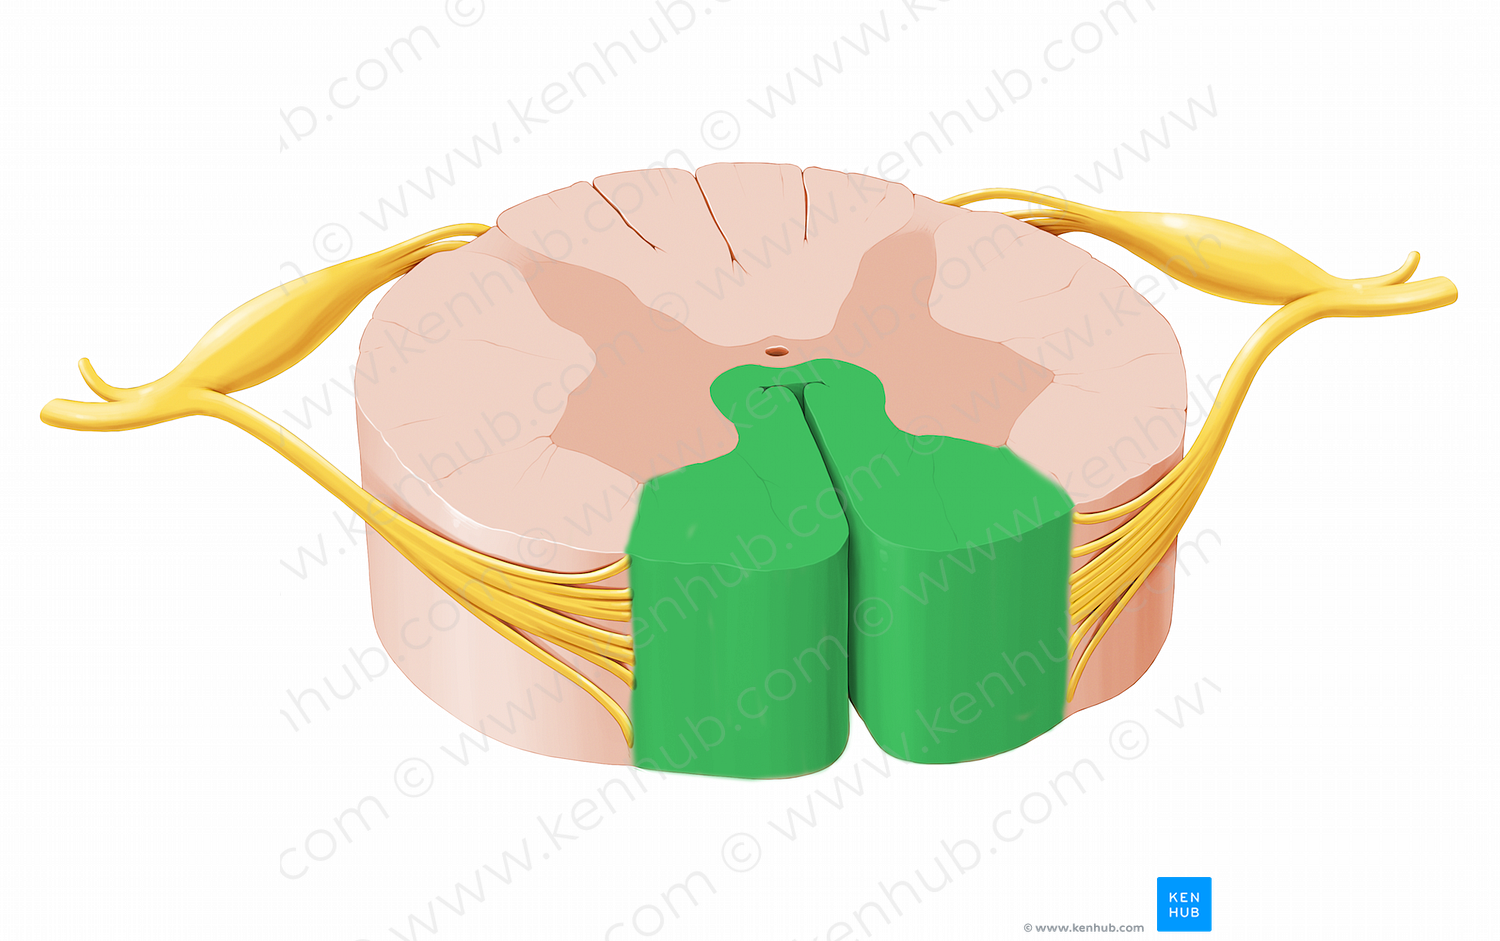 Anterior funiculus of spinal cord (#12024)